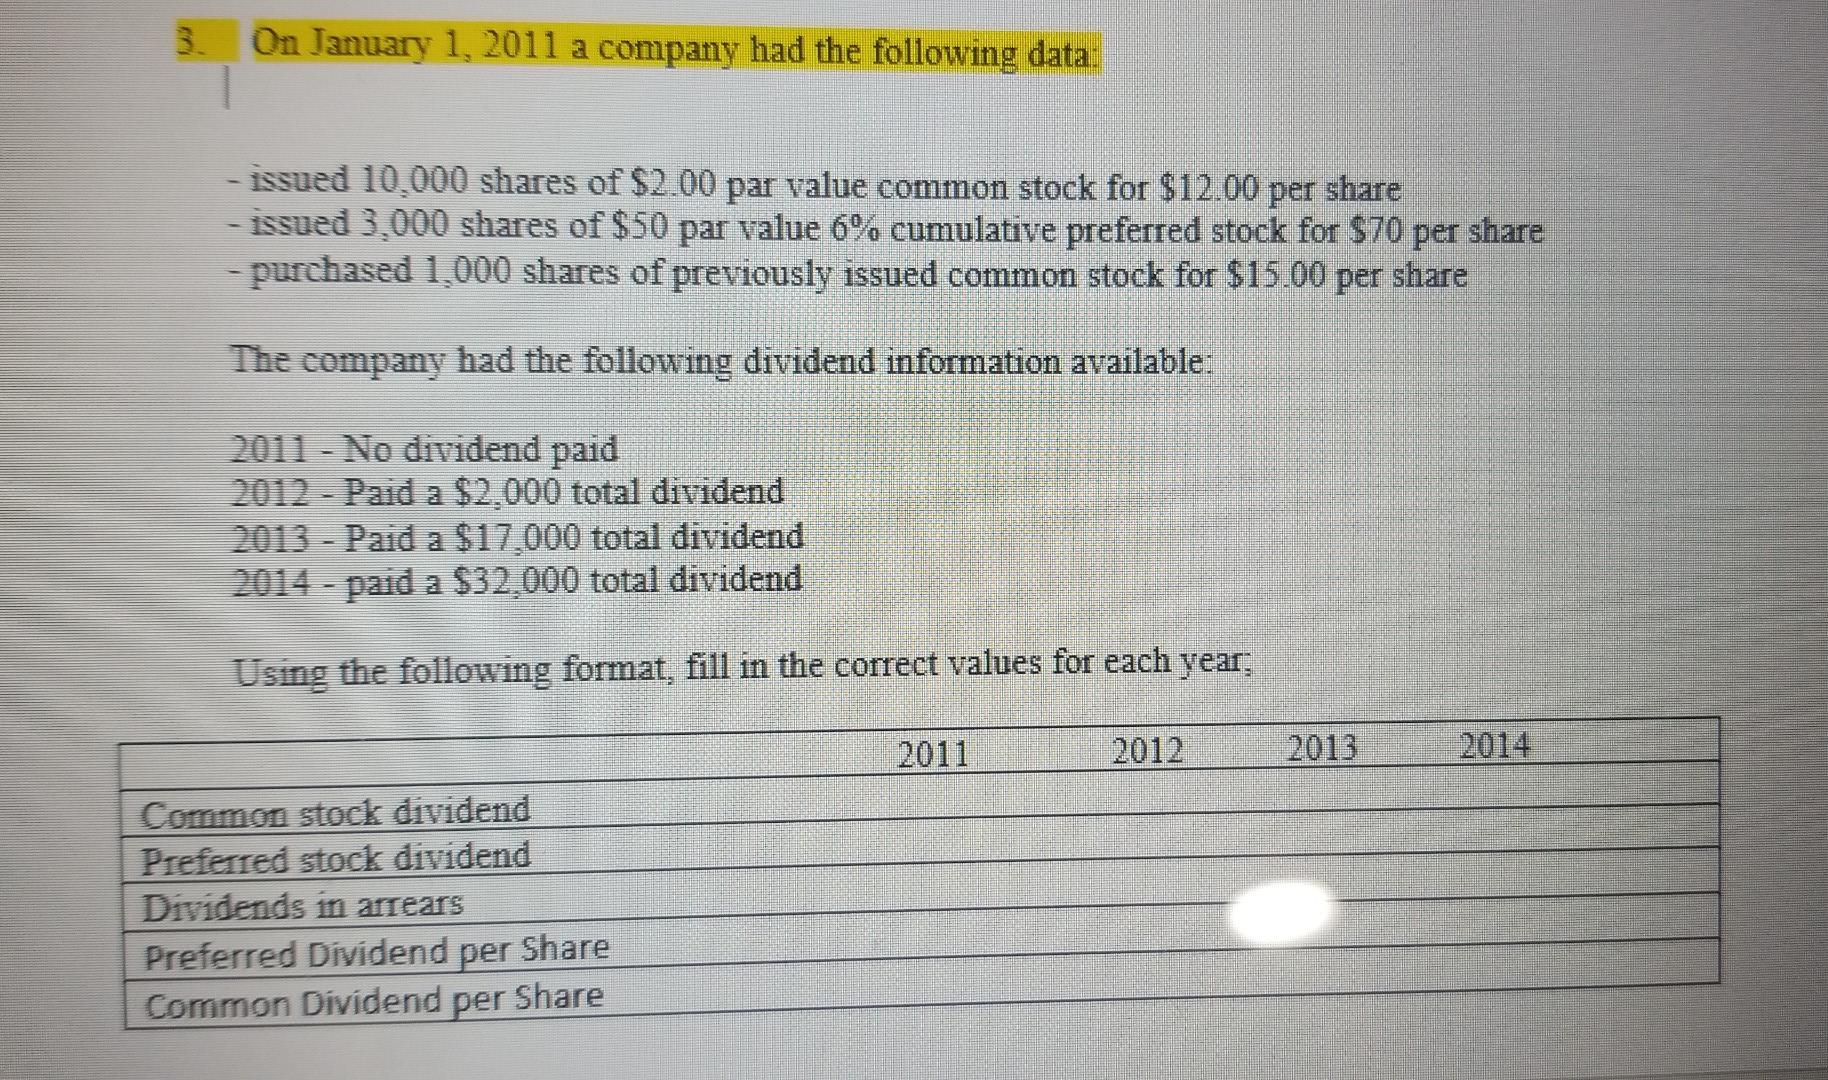 3On January 1, 2011 a company had the following data:- issued 10,000 shares of $2.00 par value common stock for $12.00 per